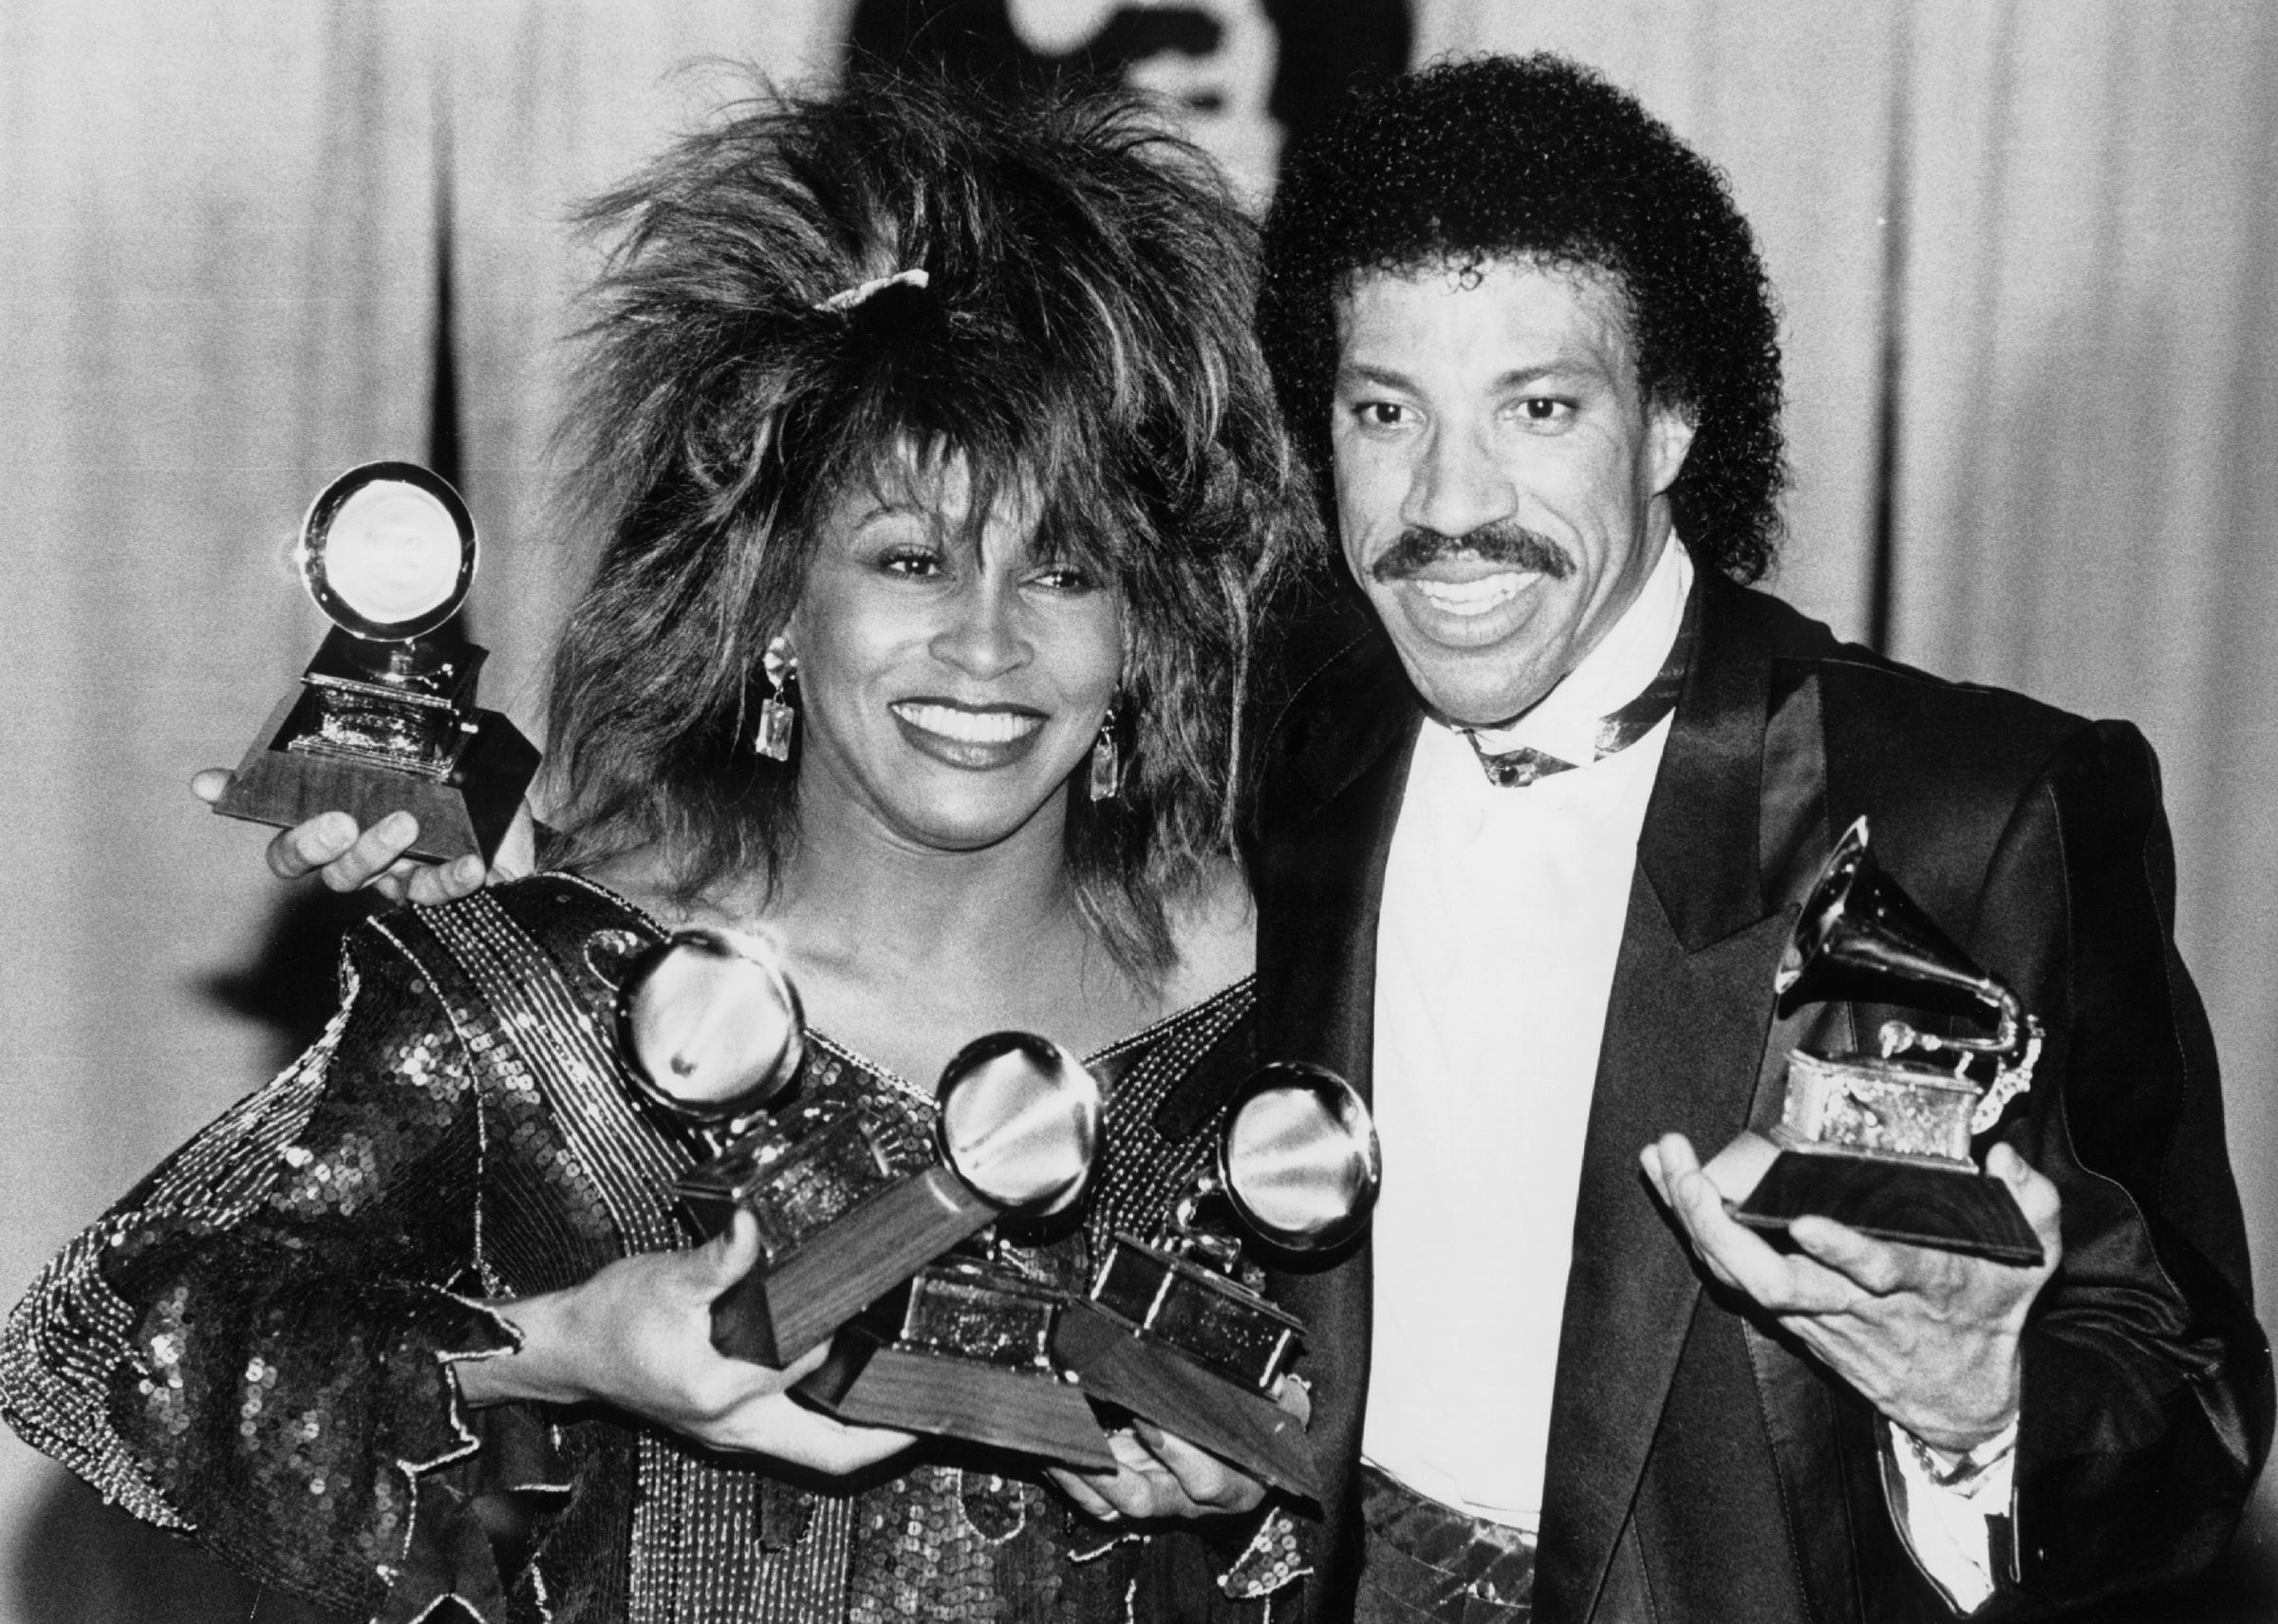 Tina Turner at the 1985 Grammy Awards with Lionel Richie and his award.